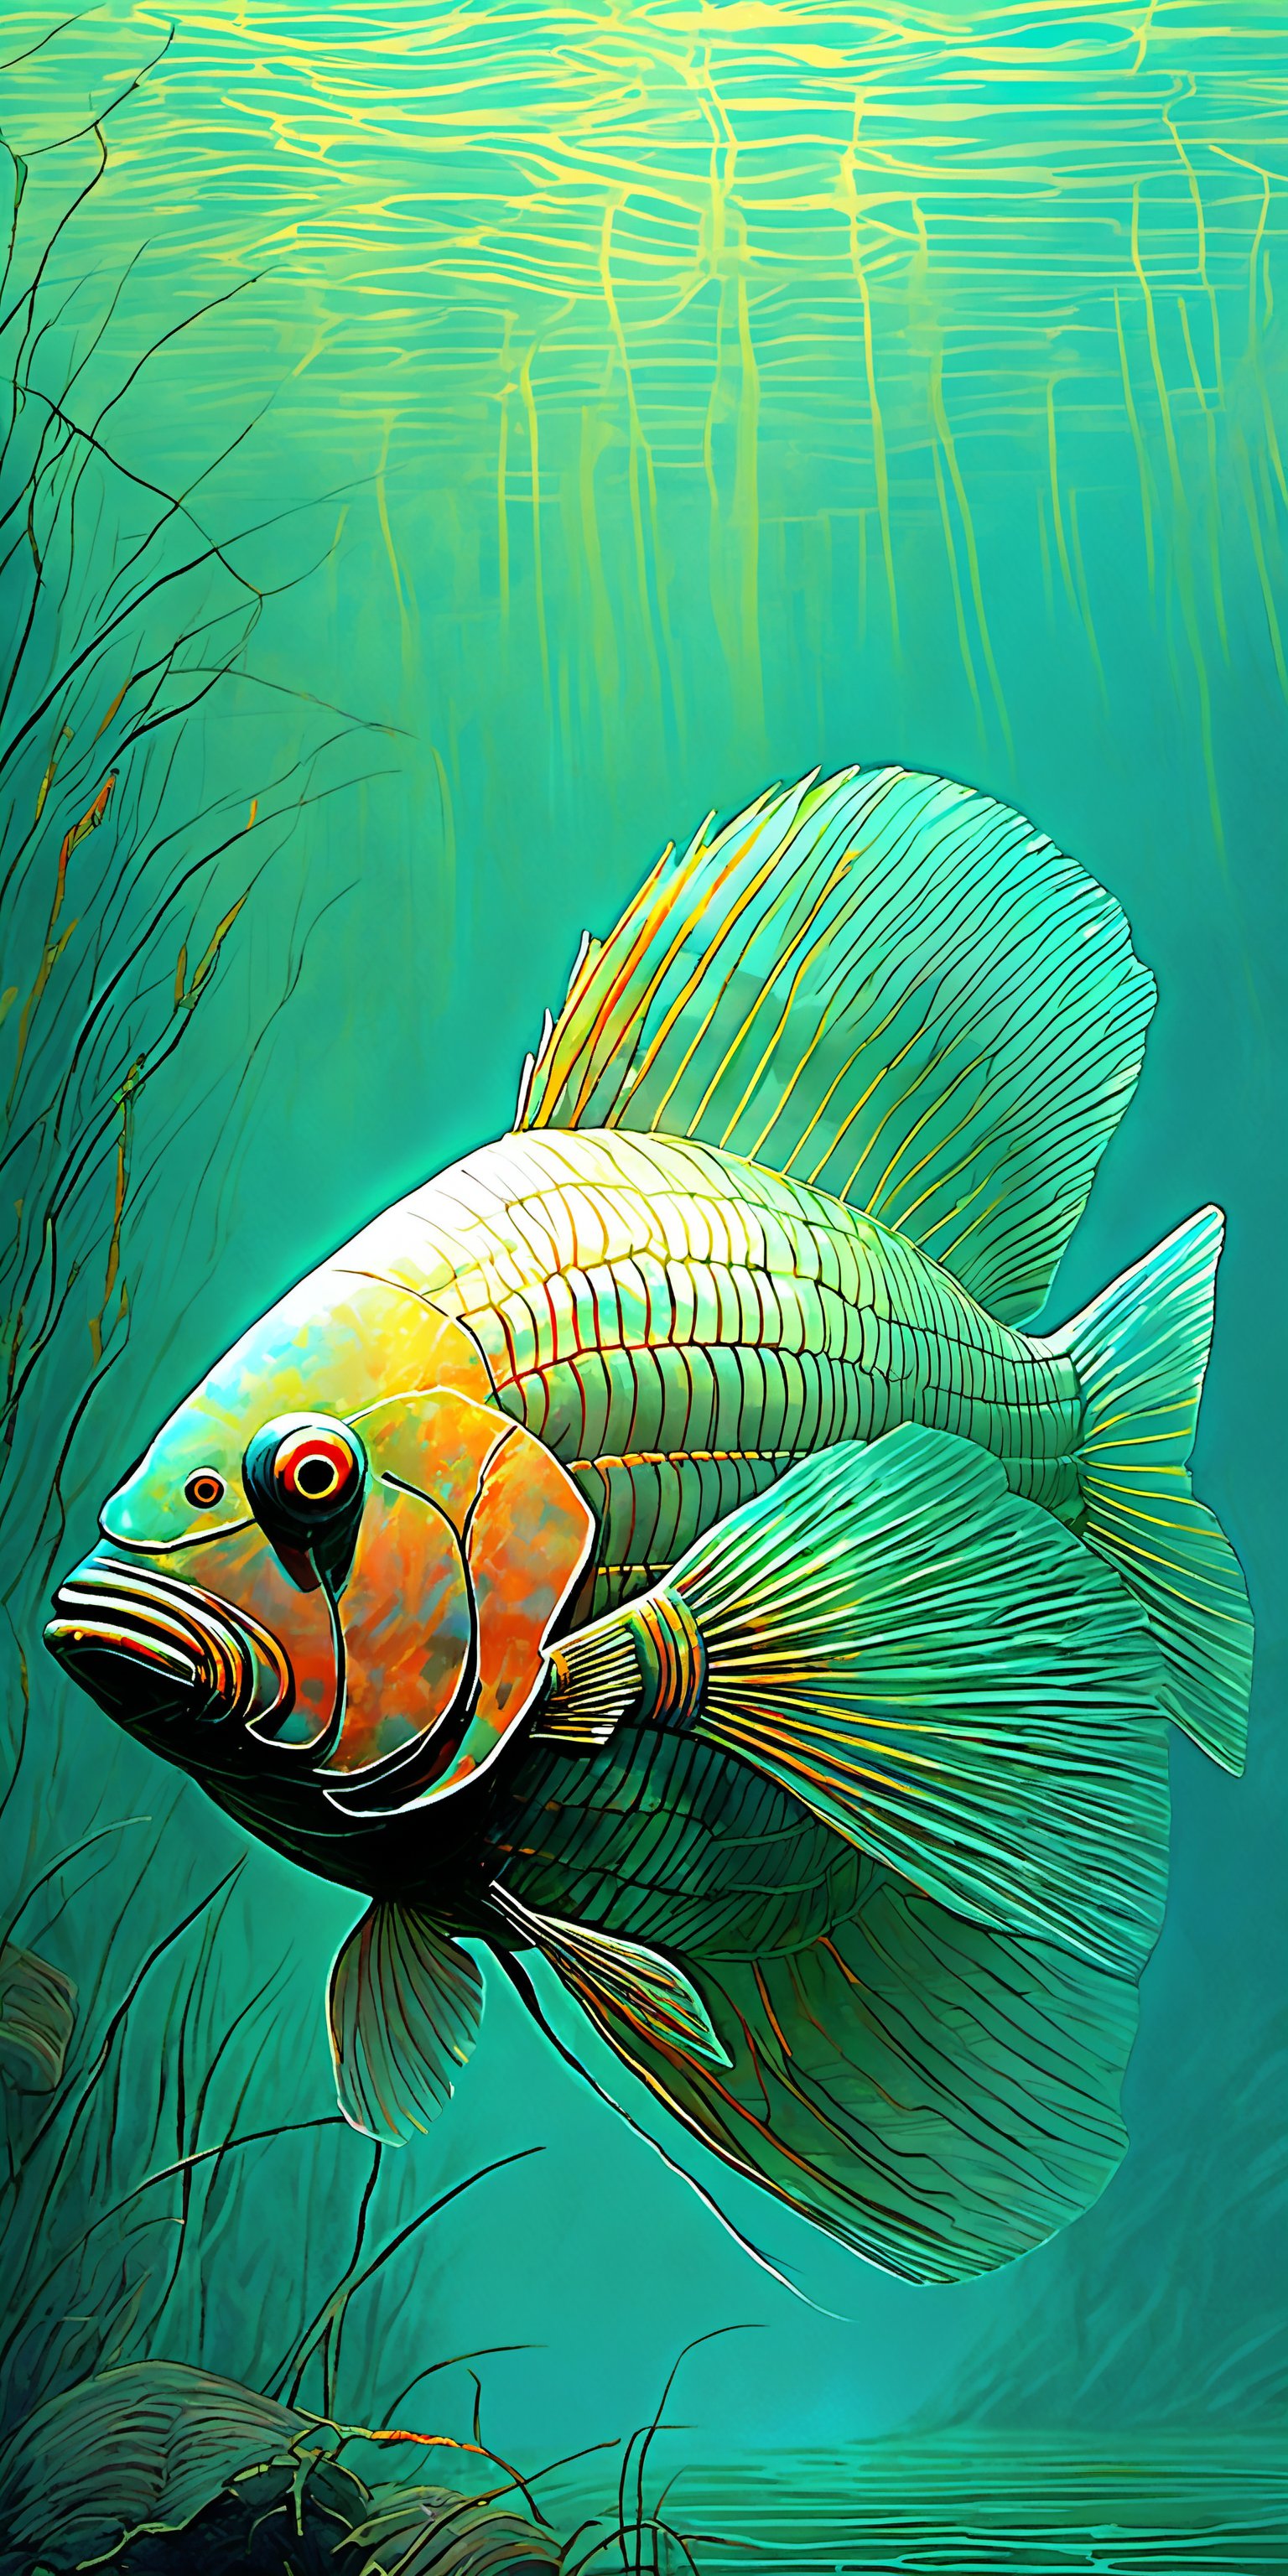 "The image features a detailed and vividly colored fish, shown in a side-on view, swimming in a serene underwater environment. The fish has a metallic, iridescent body with nearly invisible gossamer fins that shimmer with hues of green, blue, and hints of orange. The intricate patterns on the fish's scales and fins are highlighted by the soft, diffuse lighting that creates a realistic sense of depth. The background is a gradient of turquoise and green, suggesting a tranquil, ethereal underwater meadow with gentle light rays filtering through the water. Delicate aquatic plants are visible in the background, adding to the serene and natural atmosphere. The overall style is hyper-realistic, capturing the fish's anatomy and textures with meticulous attention to detail, while the soft lighting and vibrant colors evoke a sense of wonder and tranquility. To recreate this image, create an underwater scene with a vividly colored fish in a side-on view, featuring a metallic, iridescent body and nearly invisible gossamer fins, highlighted by soft, diffuse lighting in a turquoise and green gradient background with delicate aquatic plants and gentle light rays filtering through the water."

